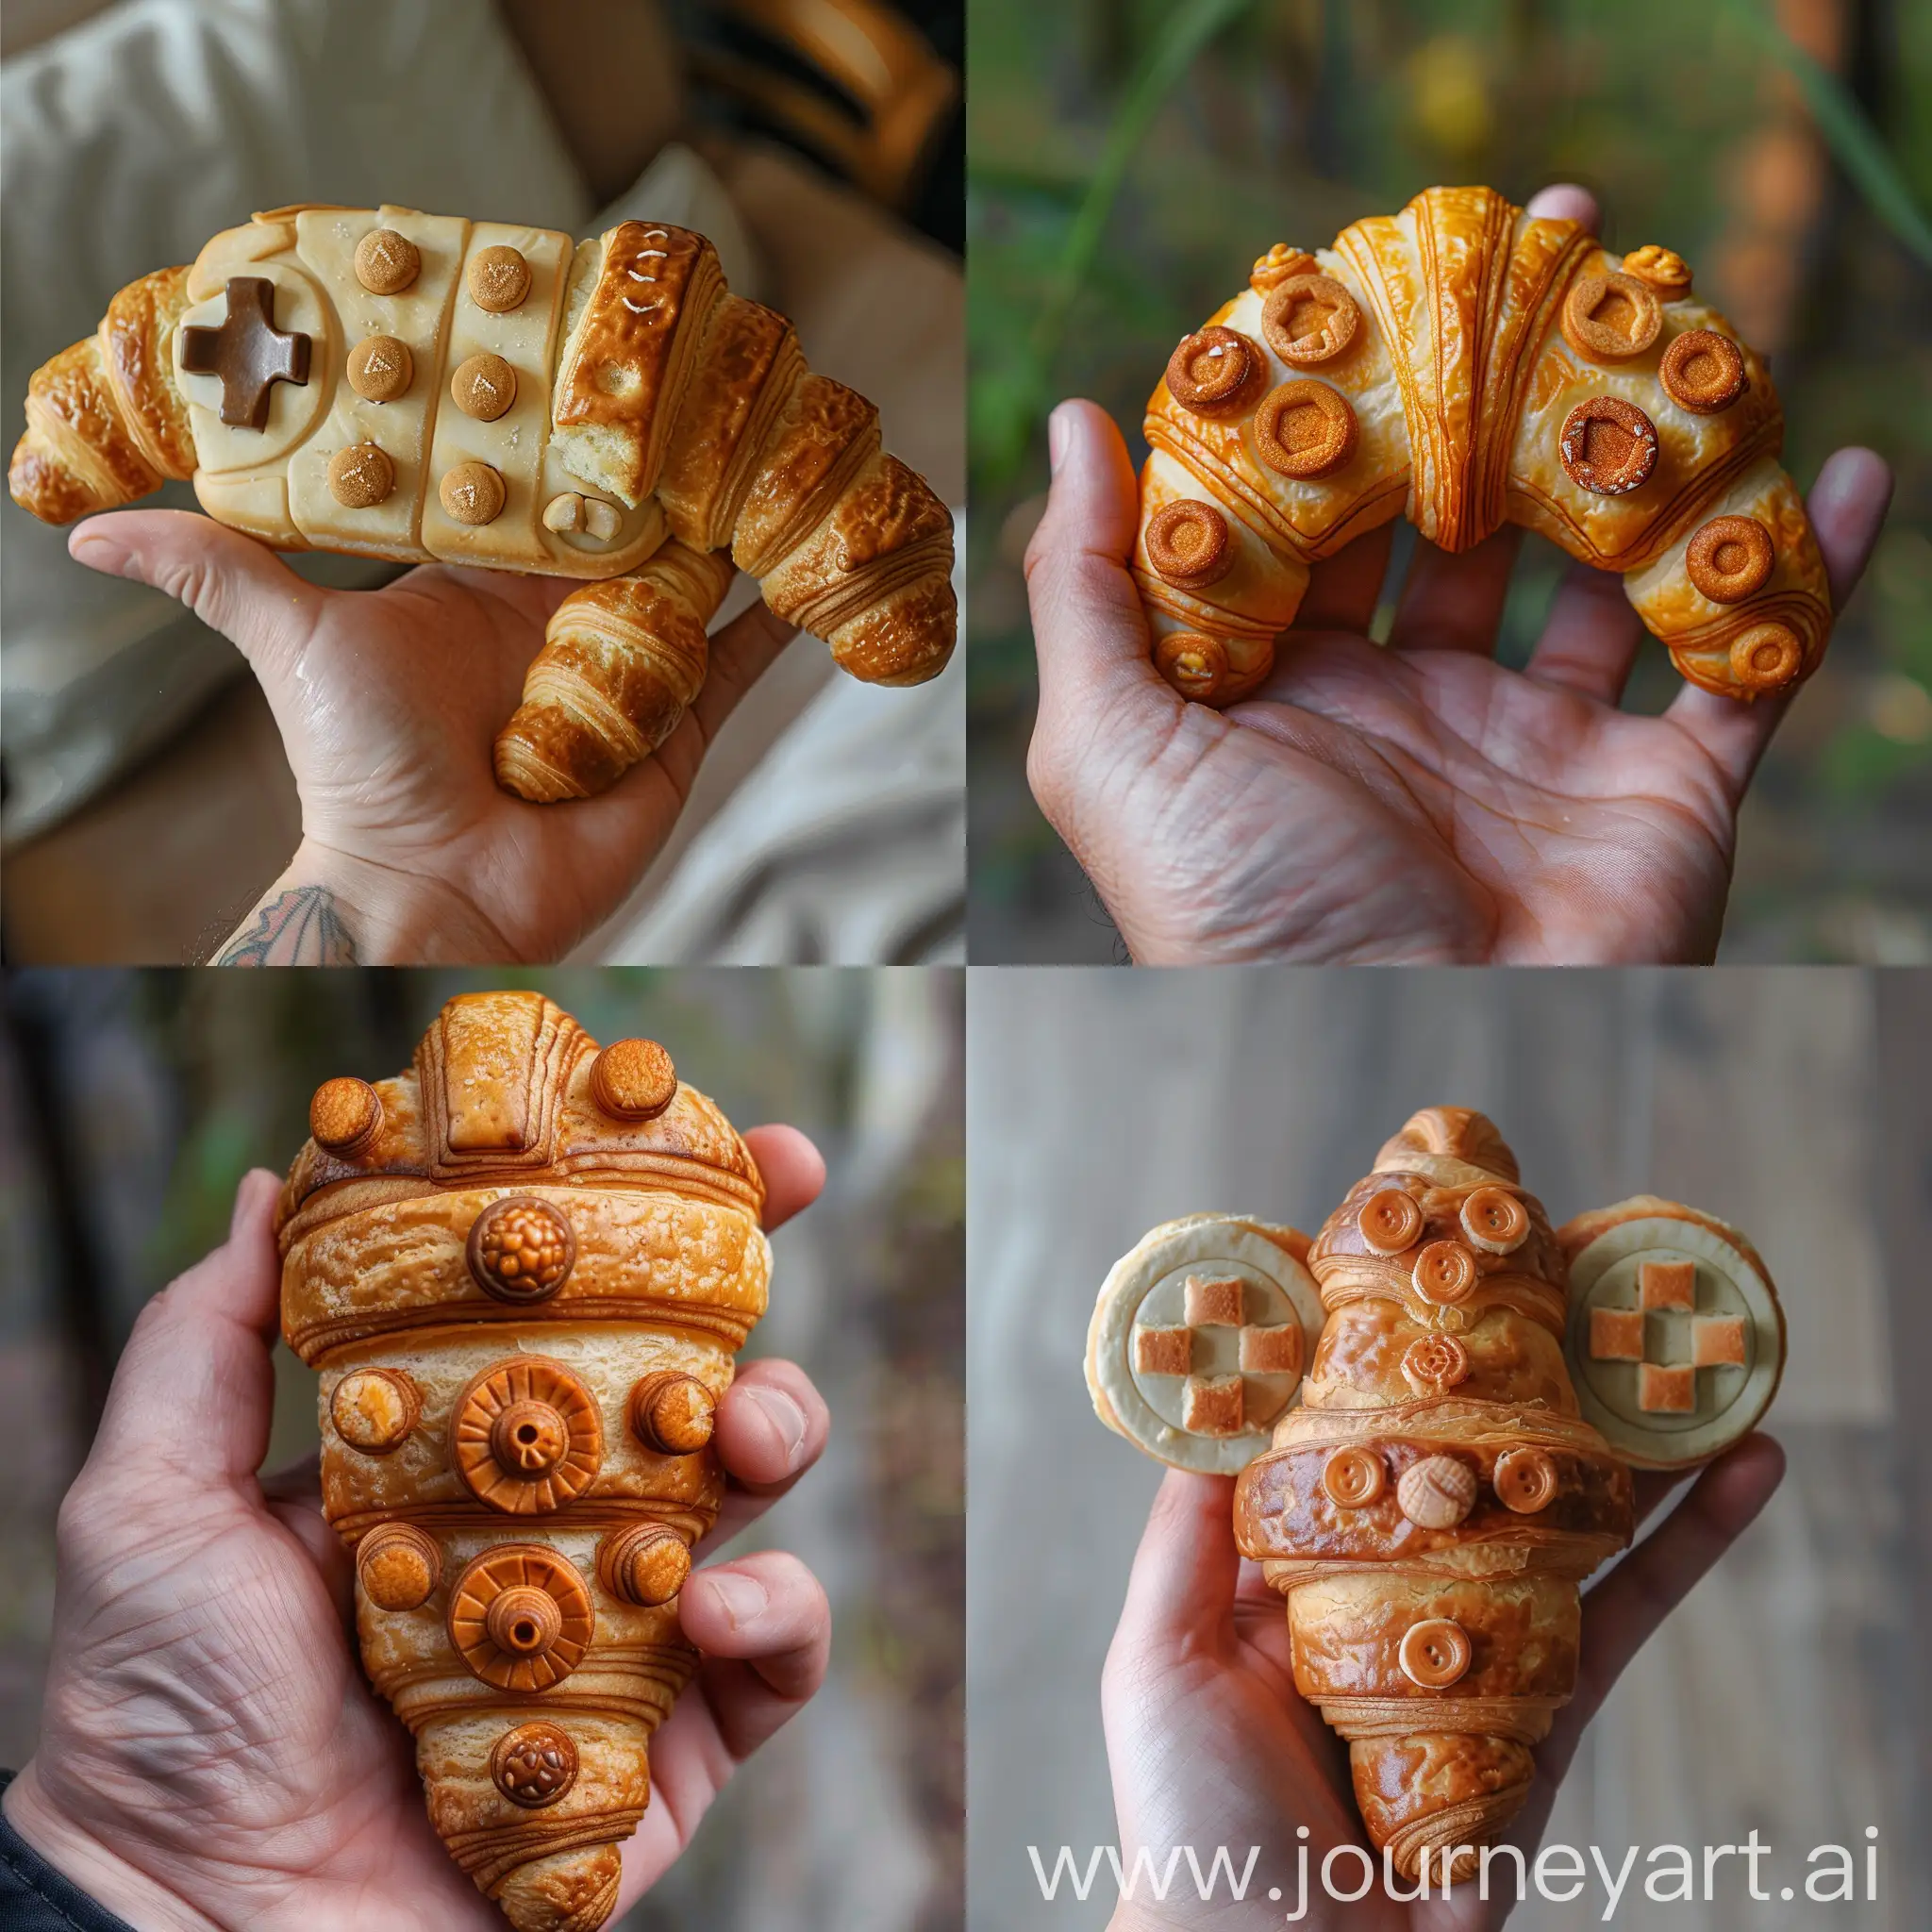 Gaming-Joystick-Croissant-Handcrafted-Bread-Controller